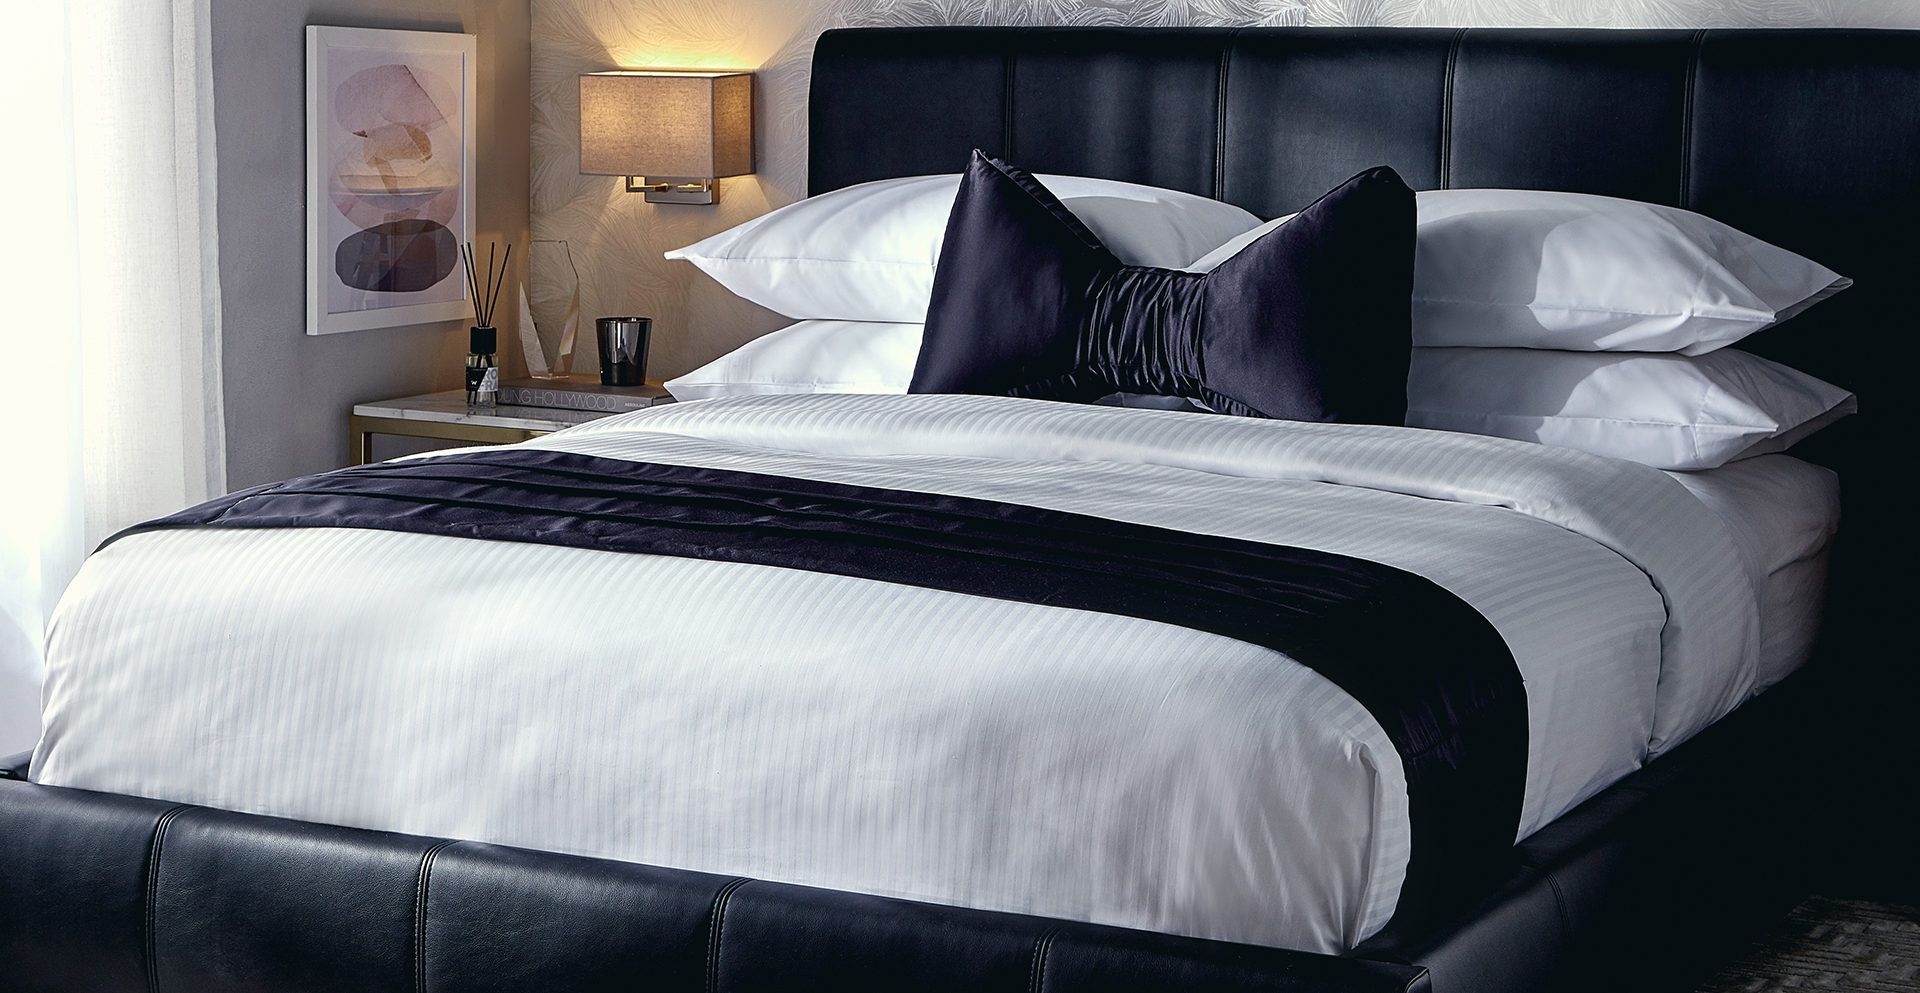 The Ritz-Carlton Hotel Shop - Towels - Luxury Hotel Bedding, Linens and  Home Decor